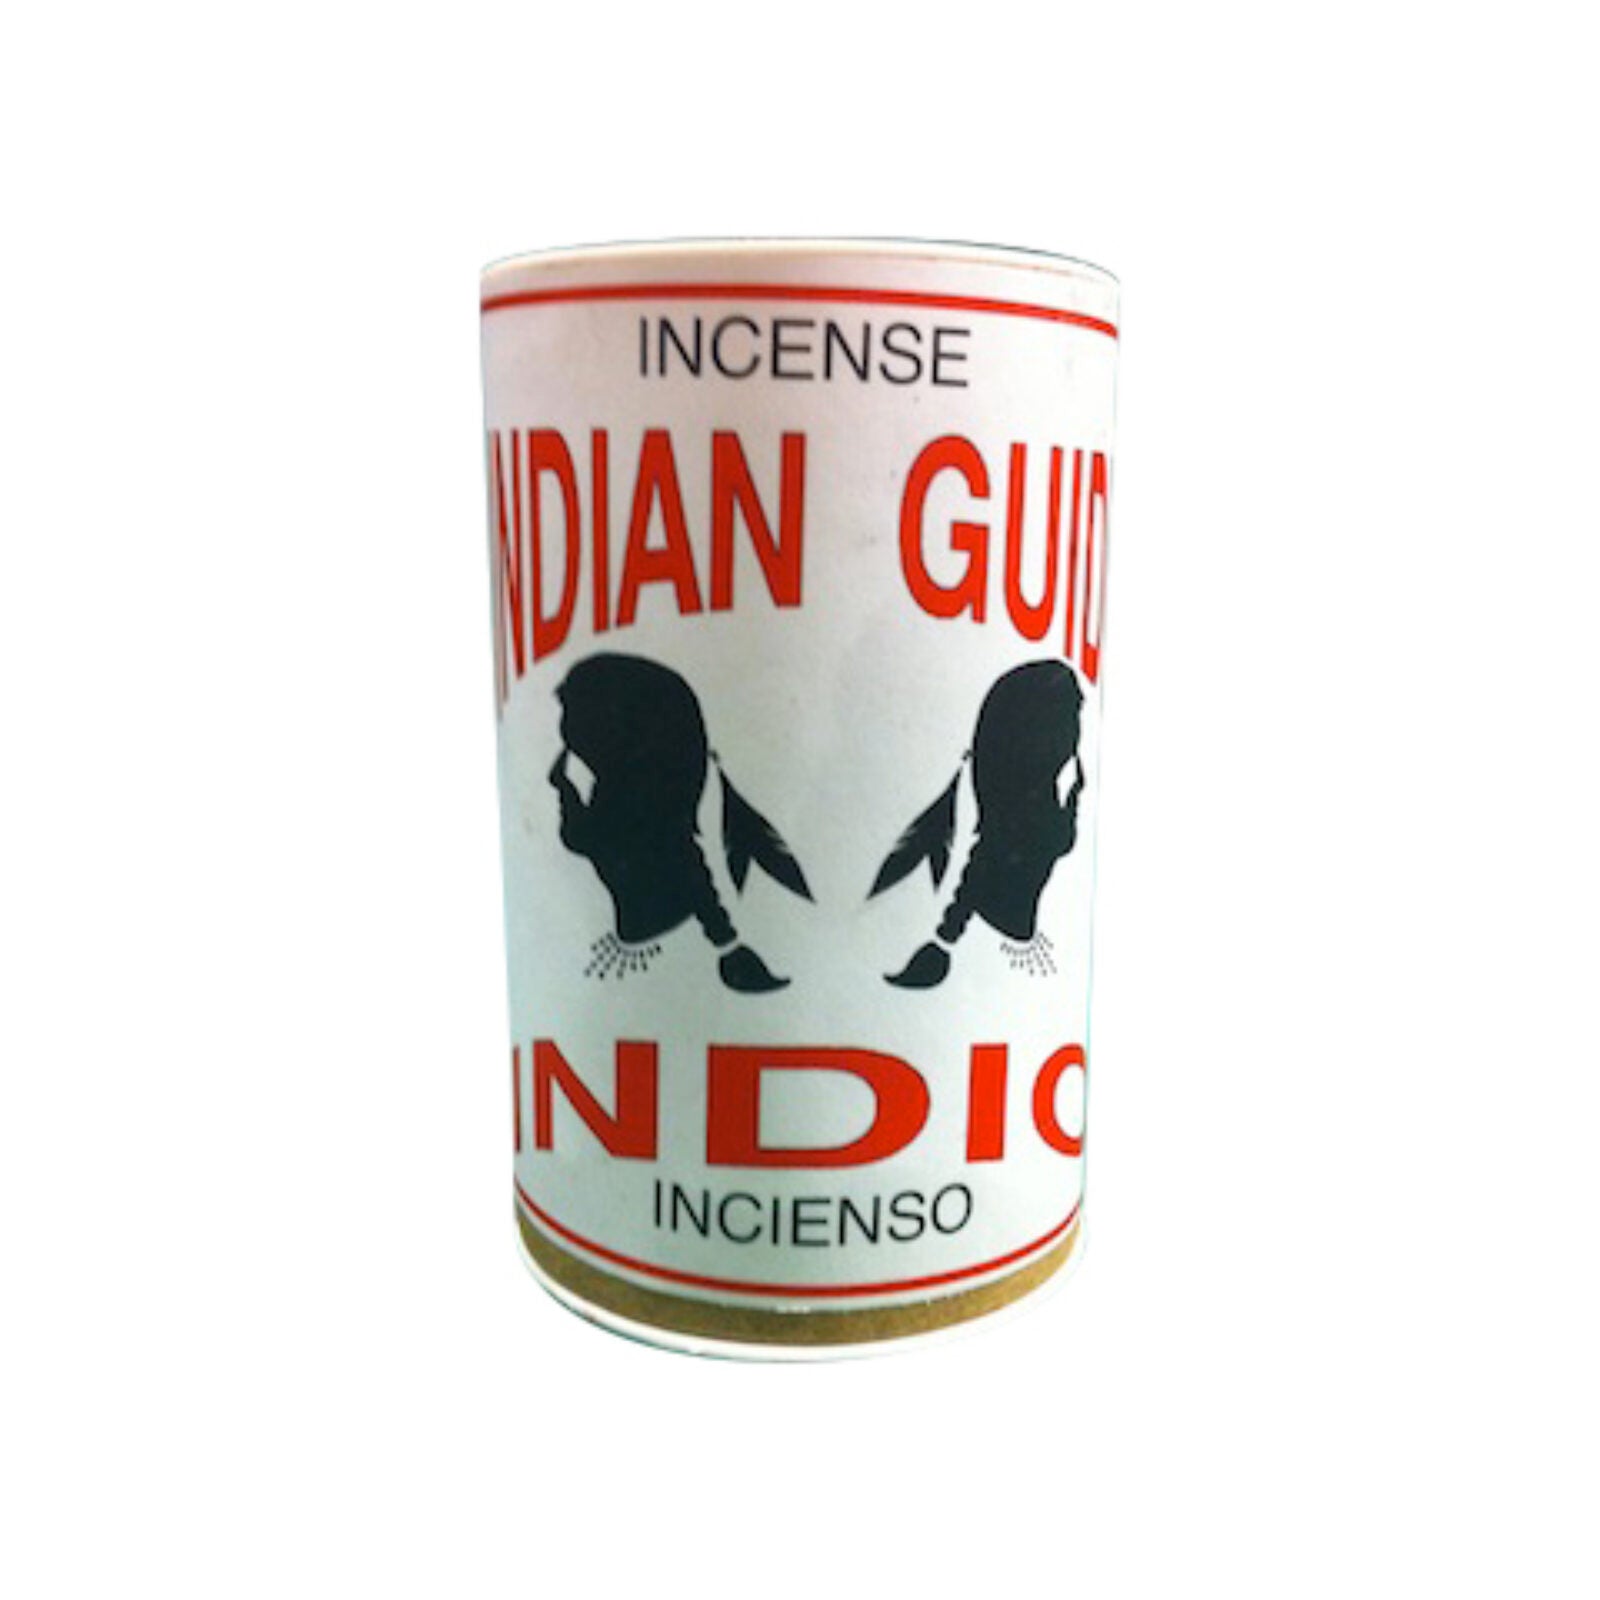 Indian Guide Incense Powder